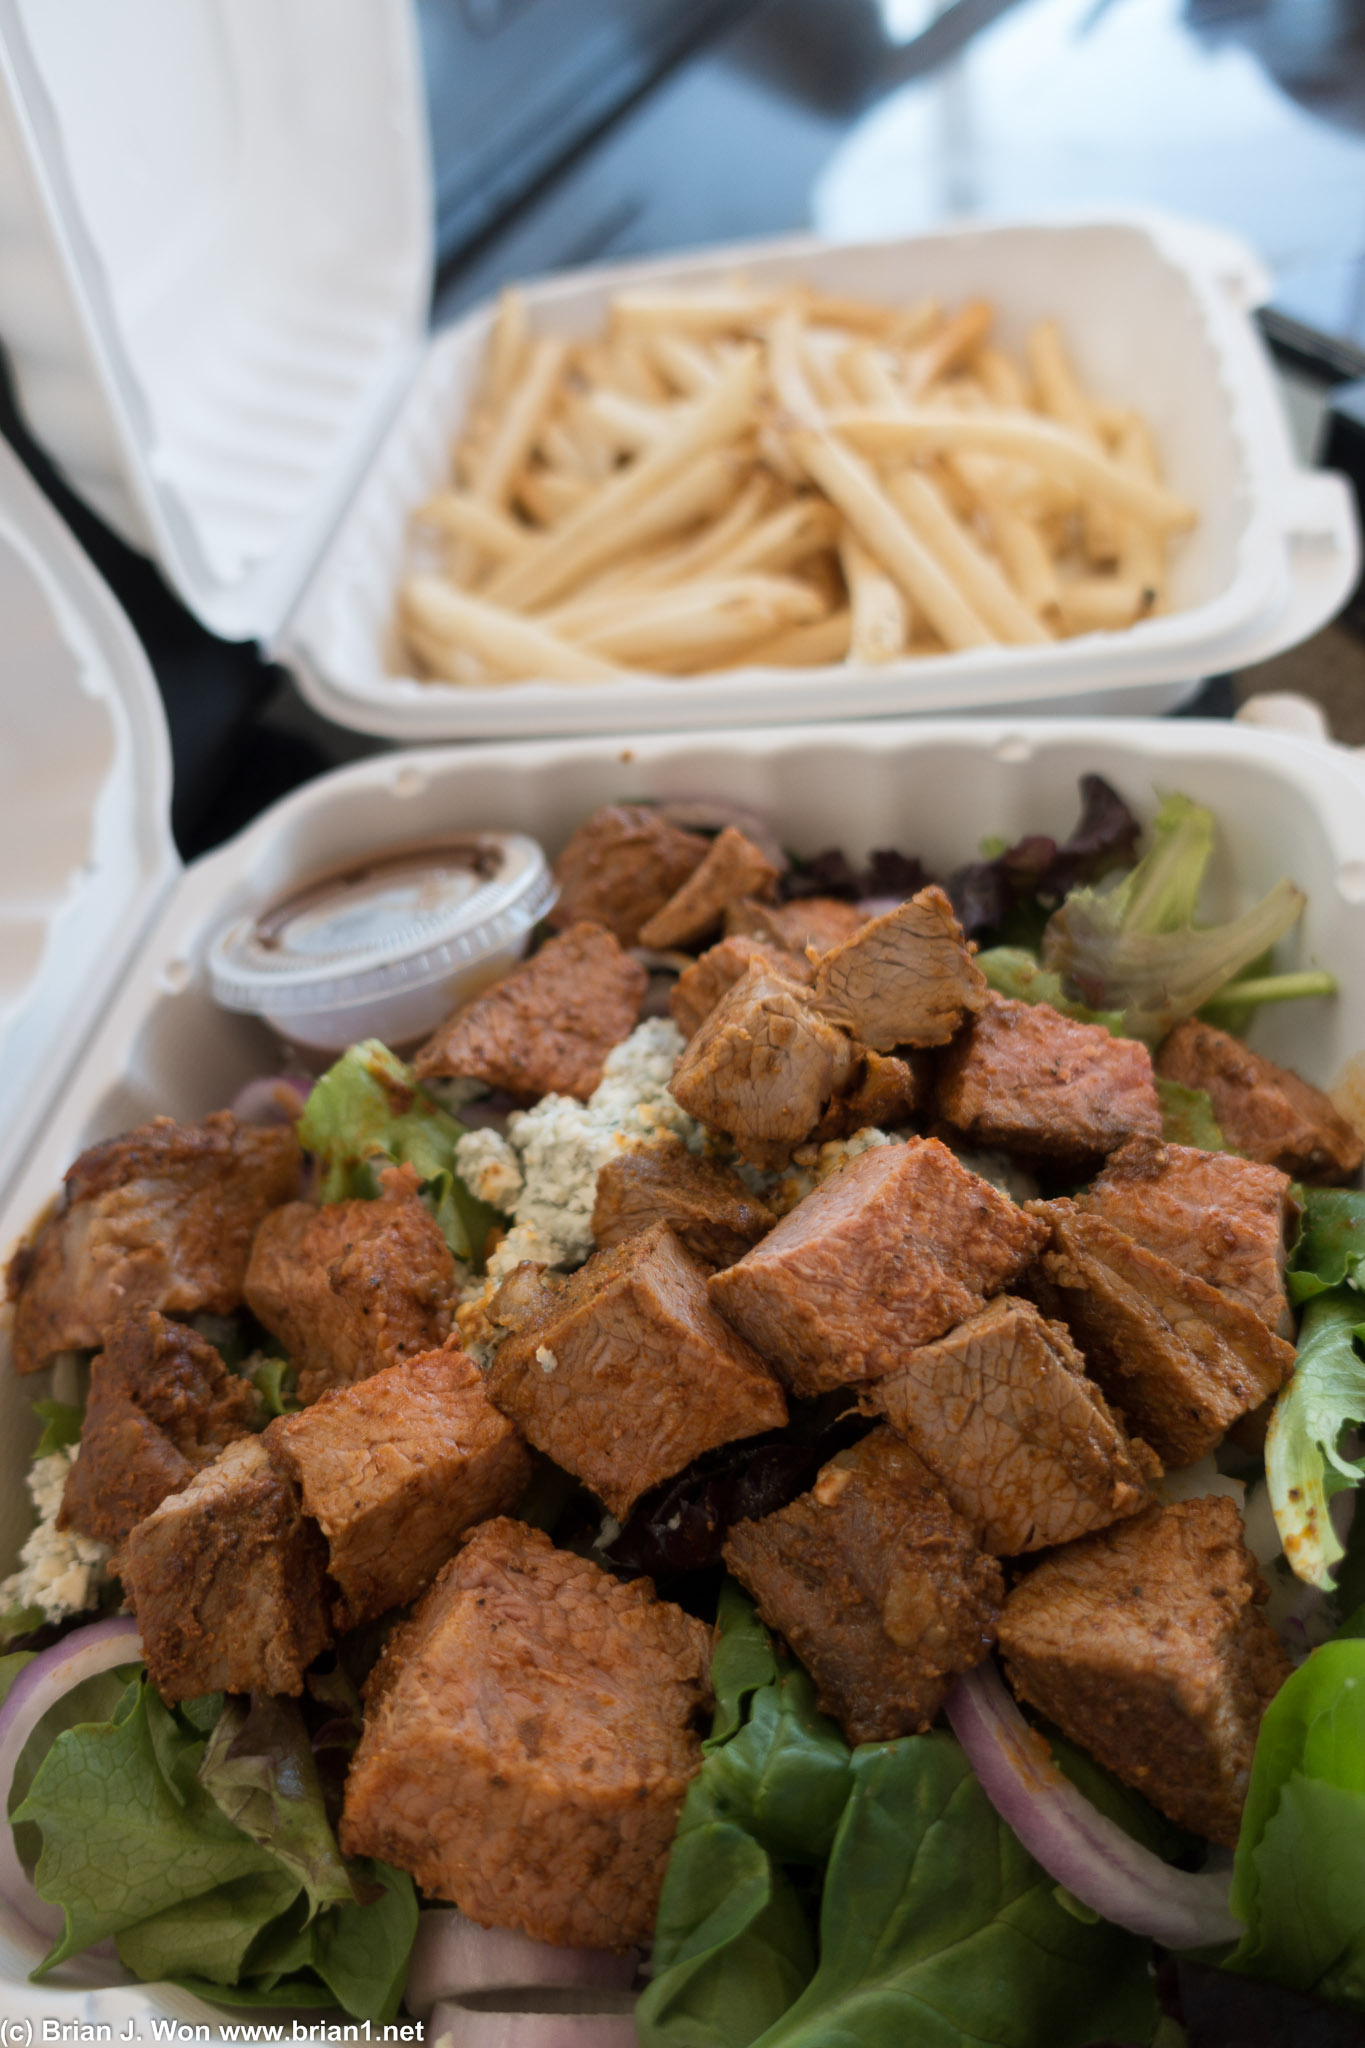 Steak salad from Jack's Urban Eats at SMF literally had an entire steak atop it. Yum but also a little crazy?